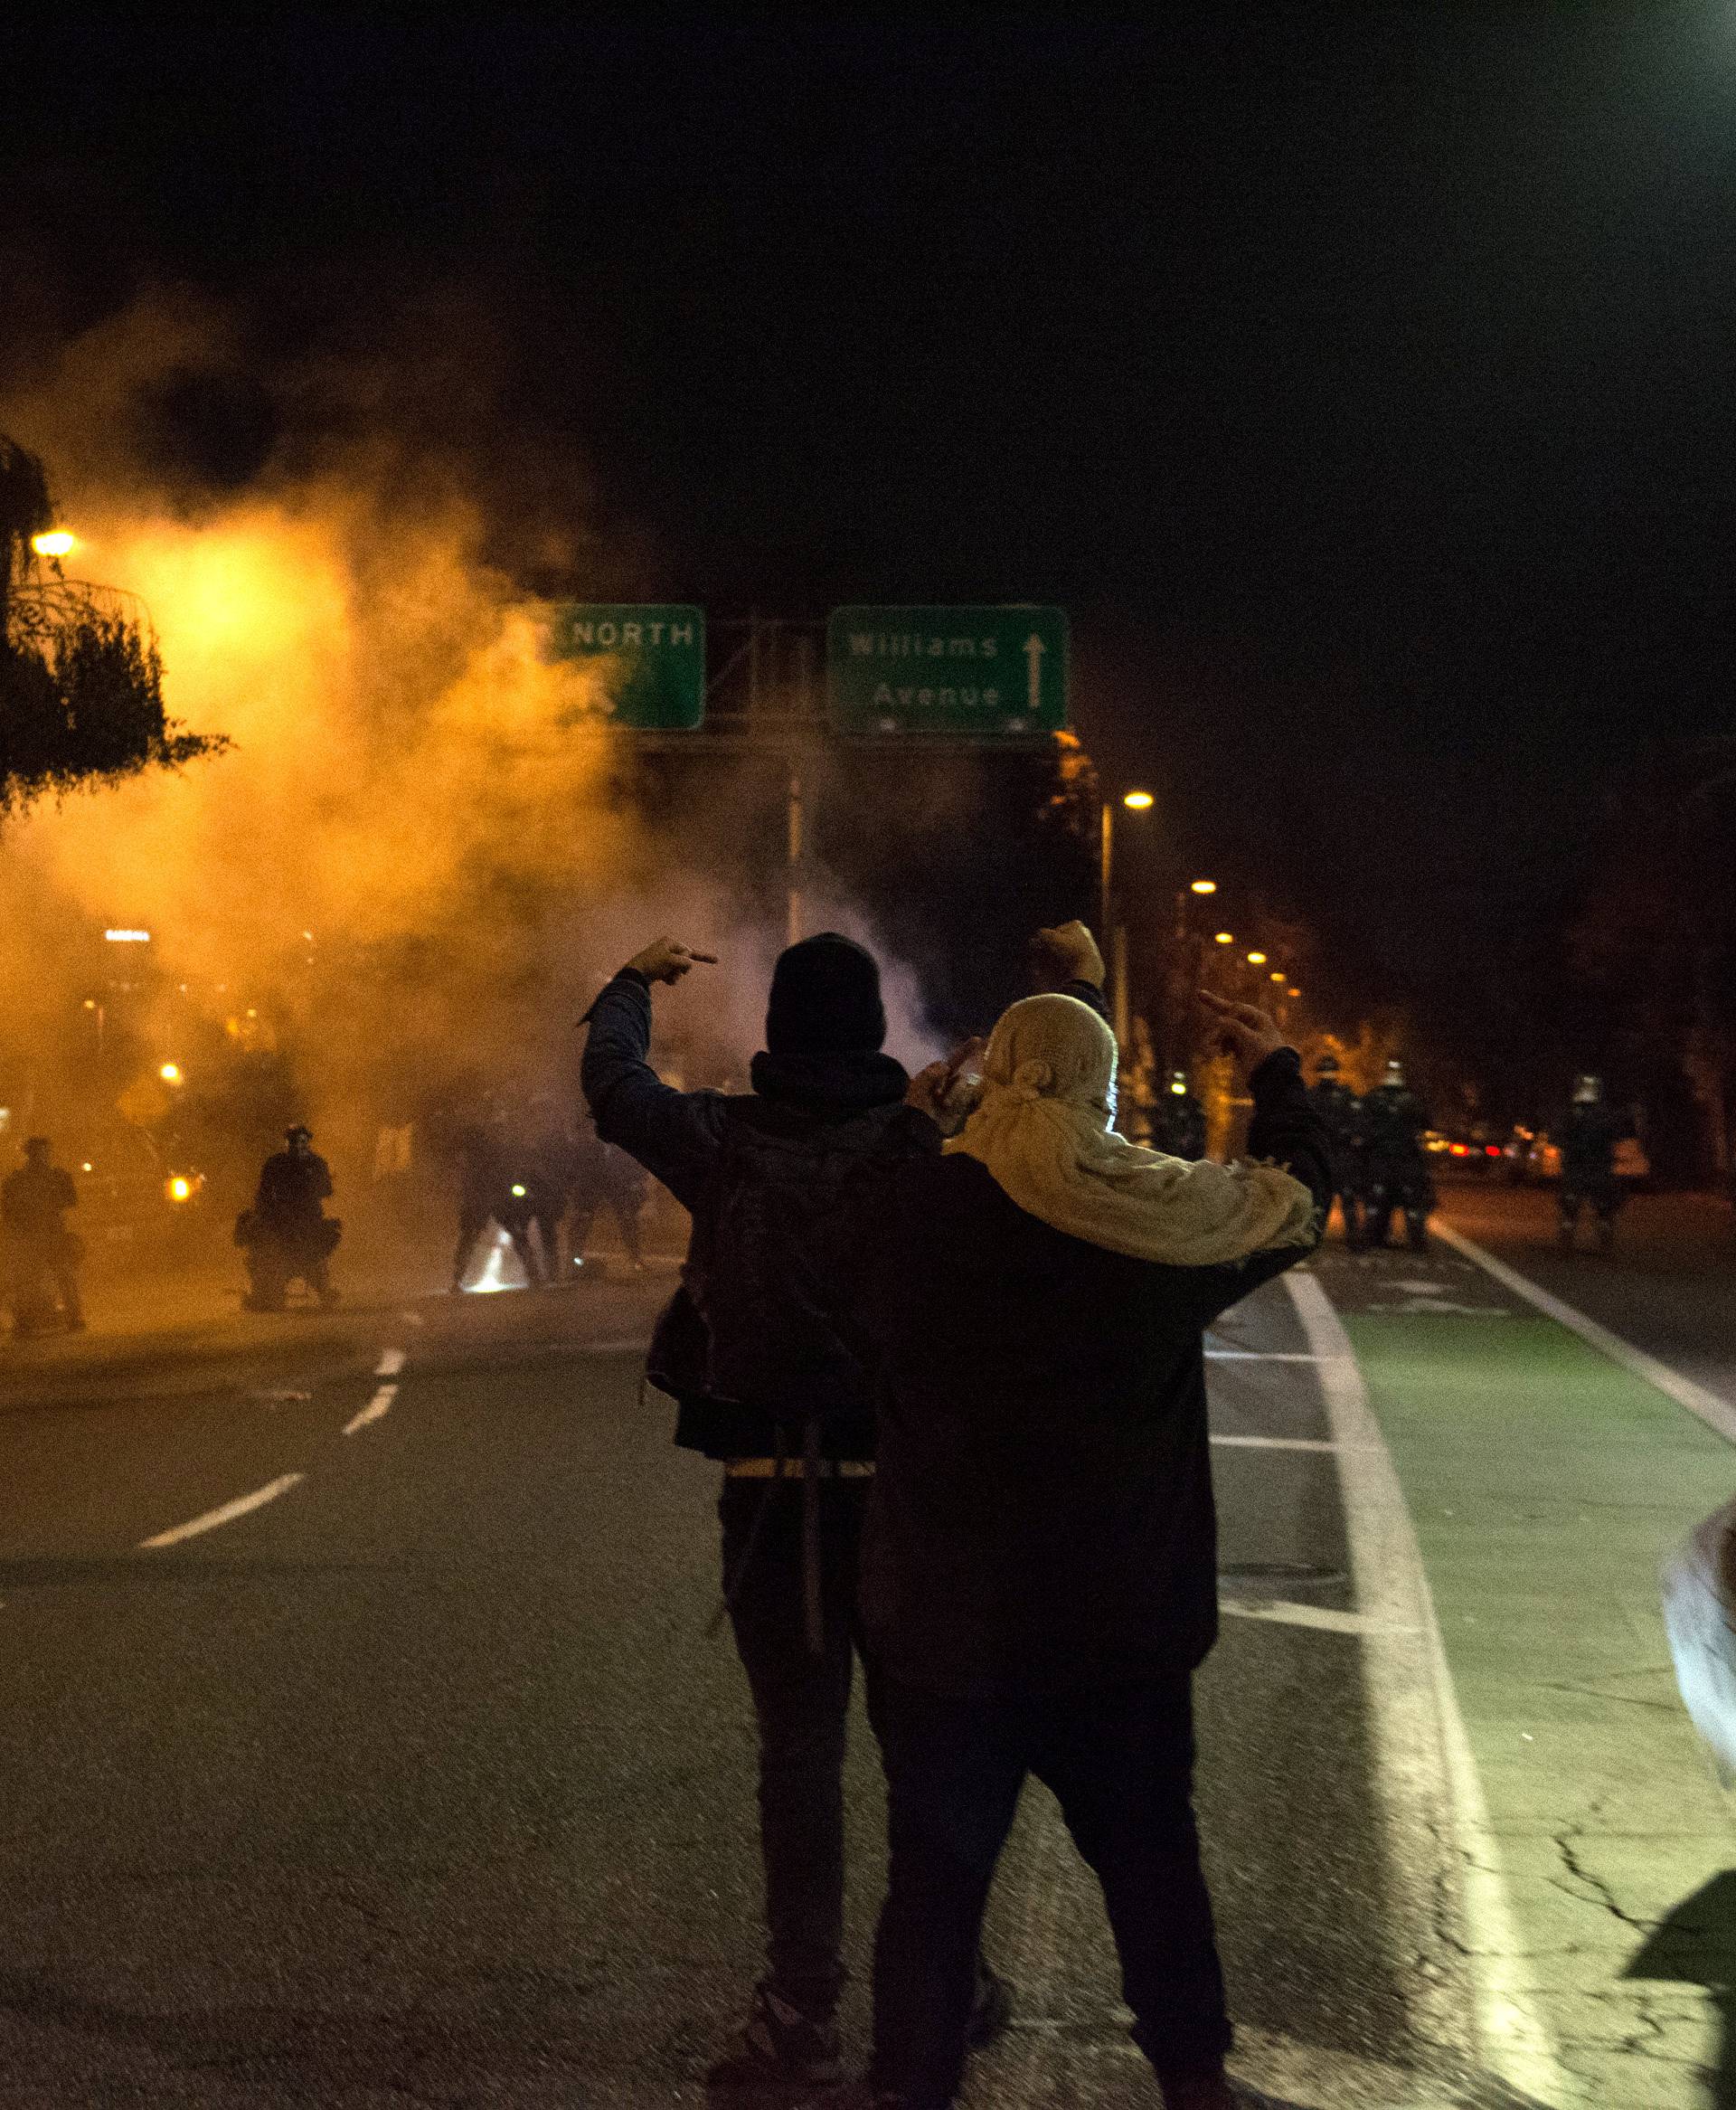 Marchers approach a freeway onramp guarded by police during a protest against the election of Republican Donald Trump as President of the United States in Portland, Oregon